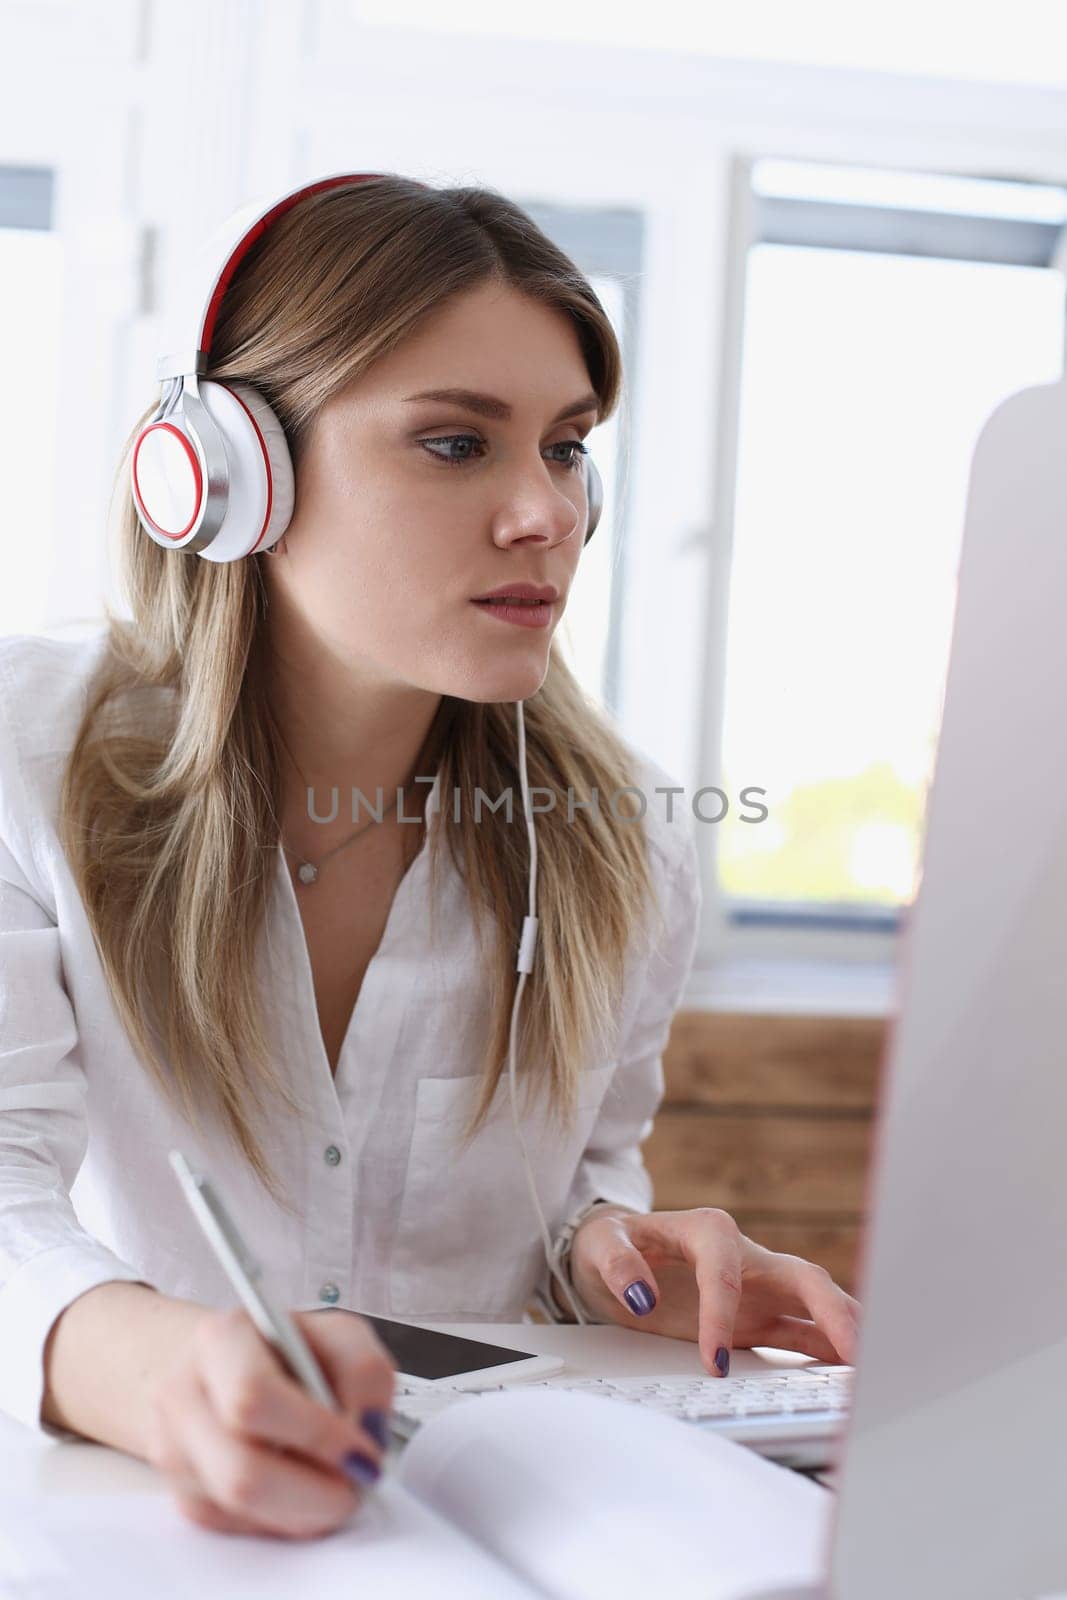 Beautiful woman wearing headphones making notes with silver pen while working on computer pc portrait. Management training course modern remote school self development and perfection concept